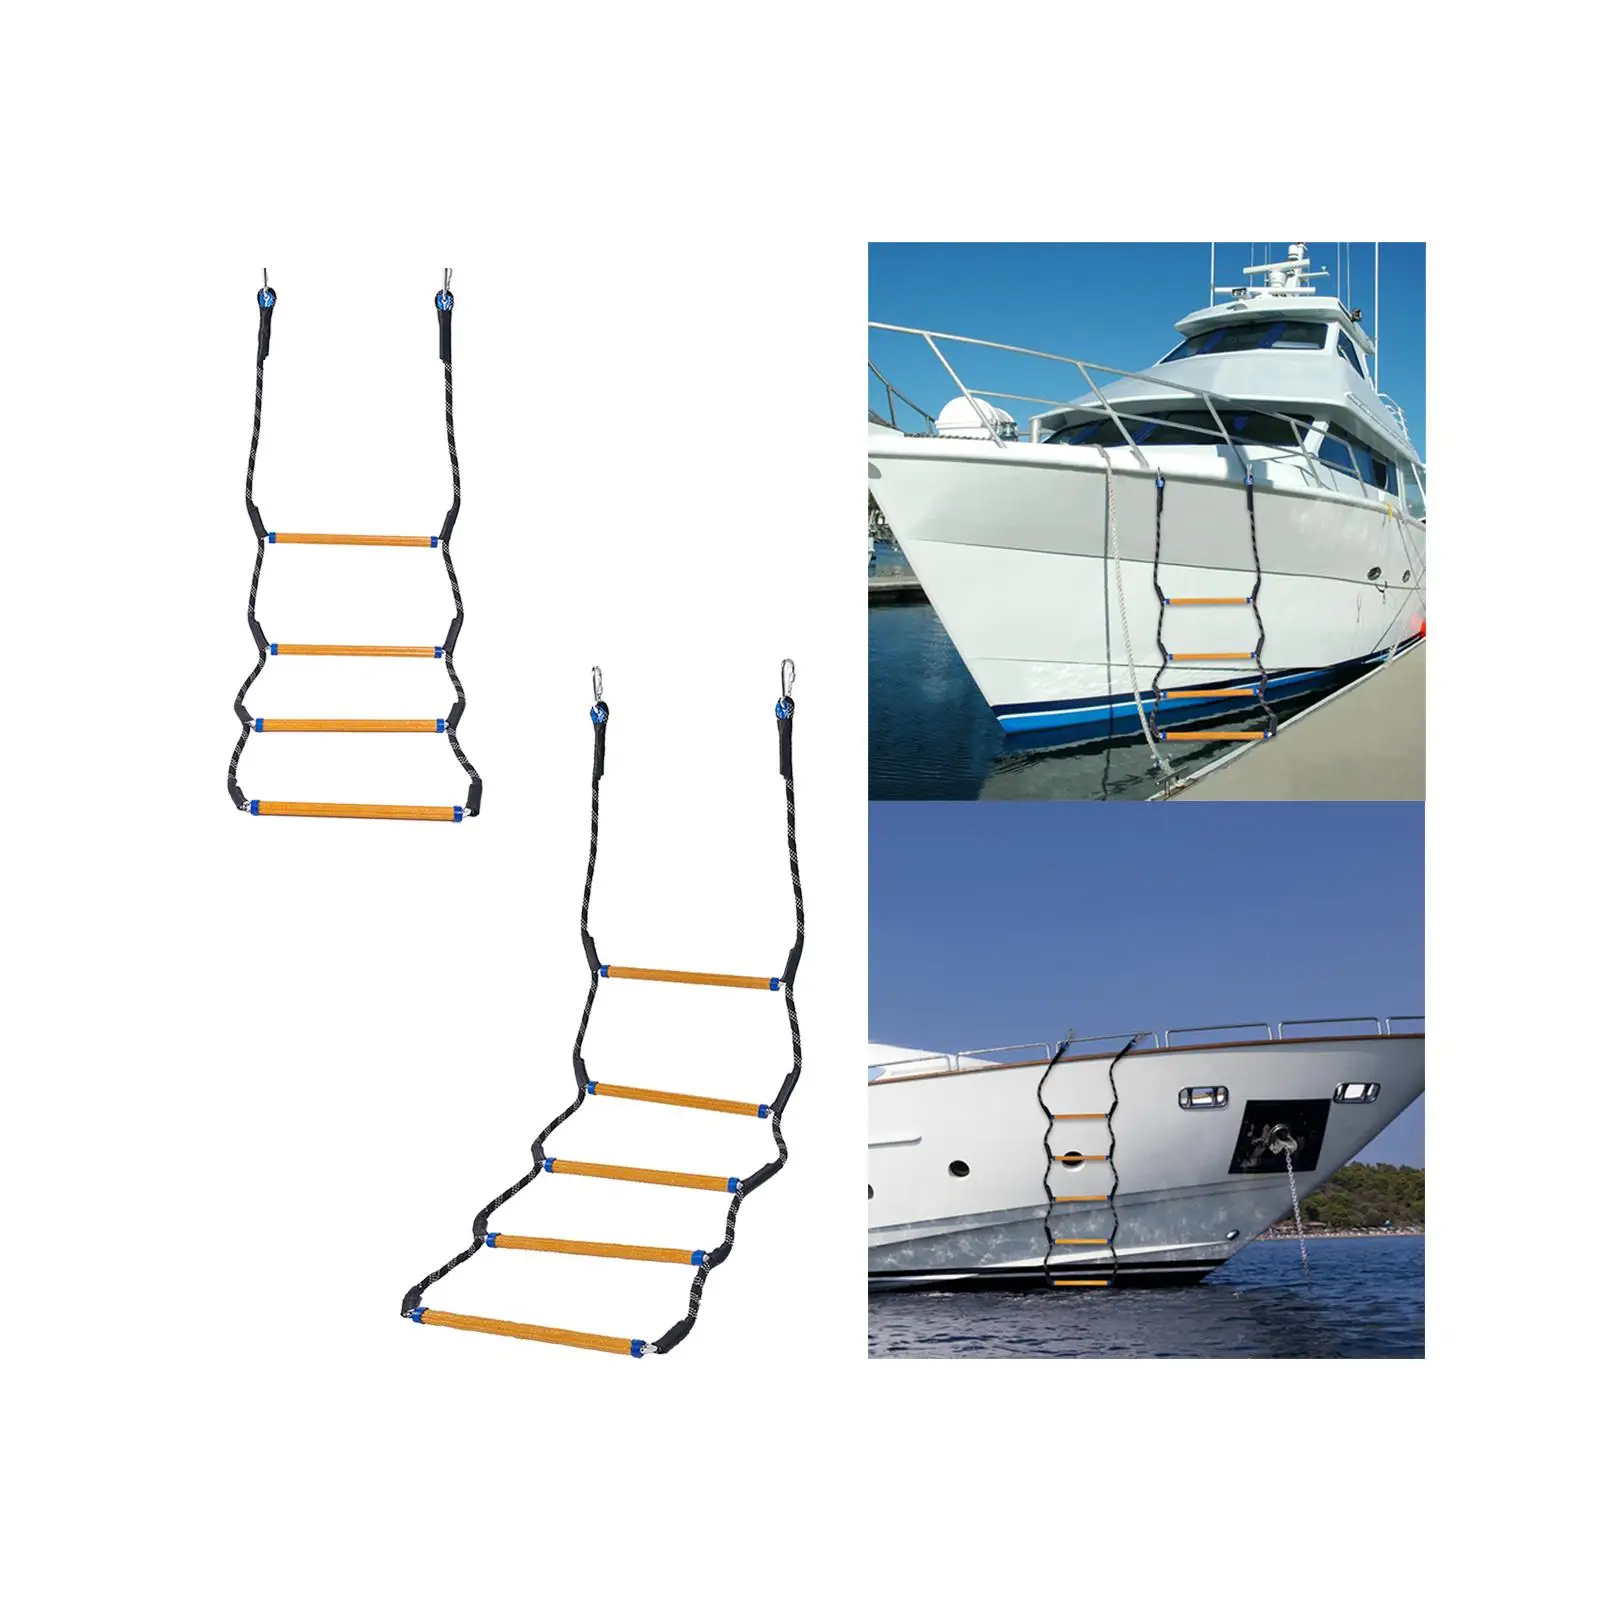 Boat Rope Ladder Assist Boarding Ladder Resin Rungs Climbing Ladders for Inflatable Boat Kayaking Sailing Motorboat Fishing Boat